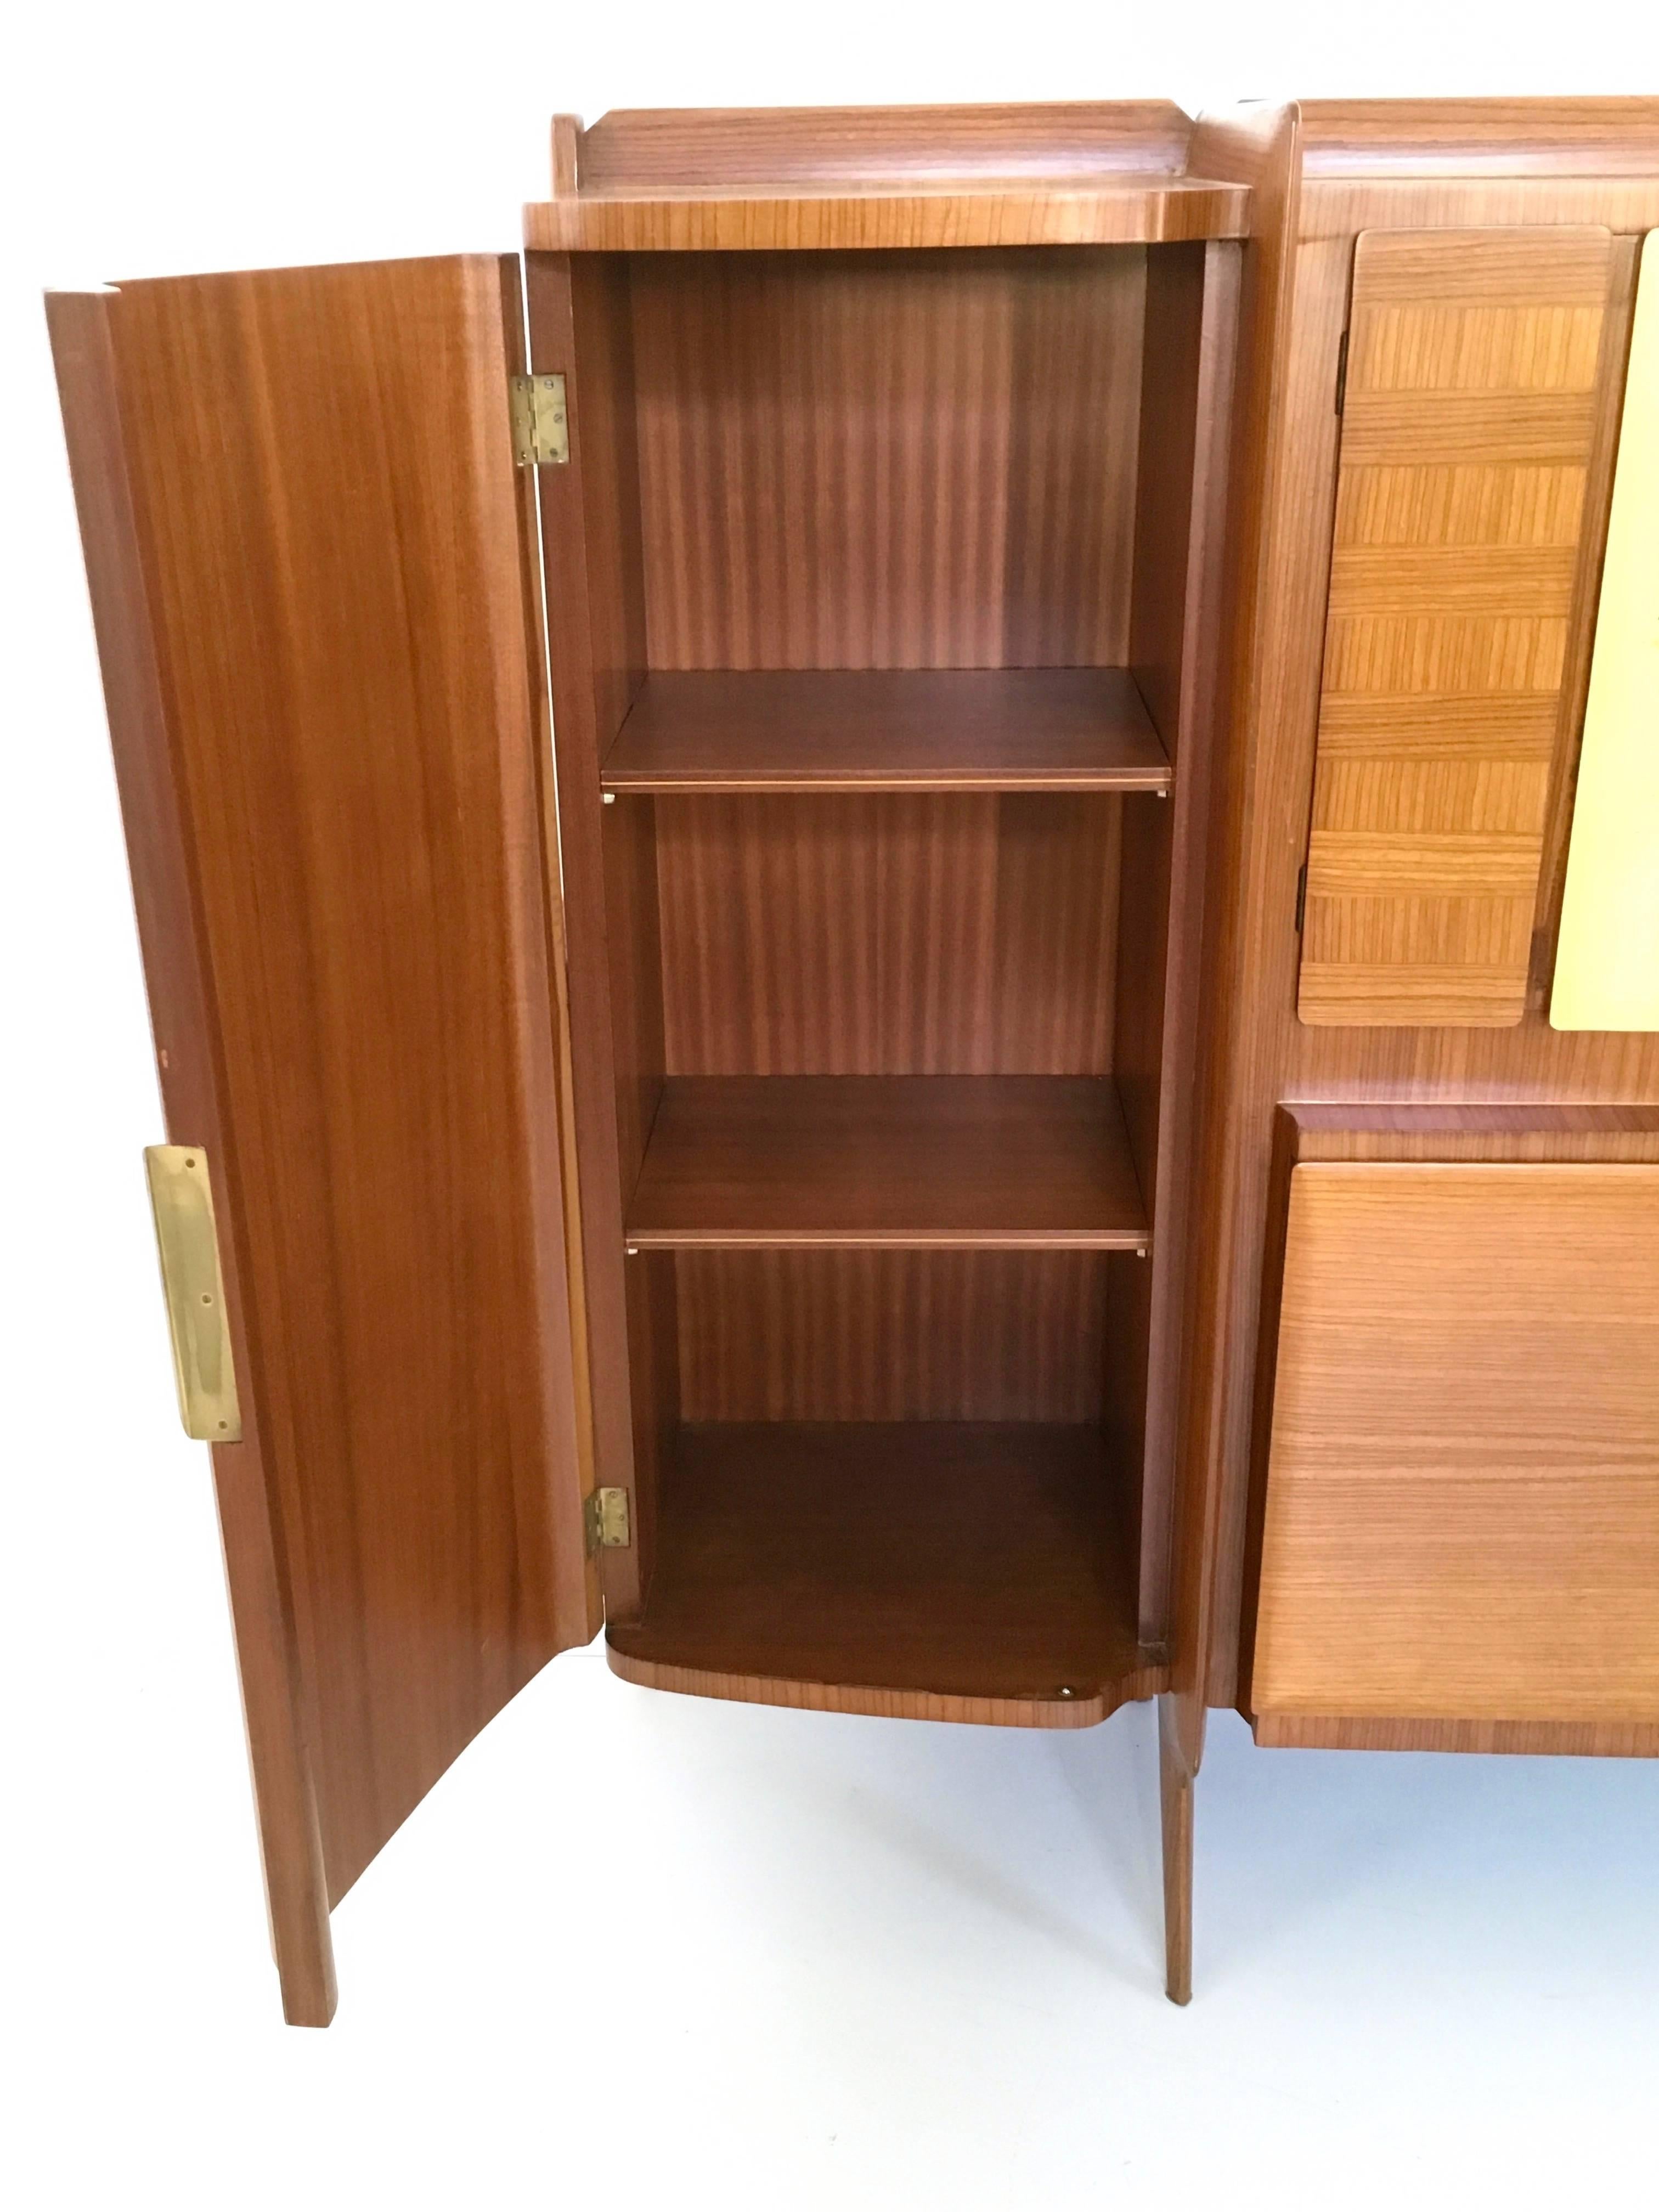 Monumental Wooden Cabinet with Parchment Panels by Gio Ponti, Italy In Good Condition For Sale In Bresso, Lombardy